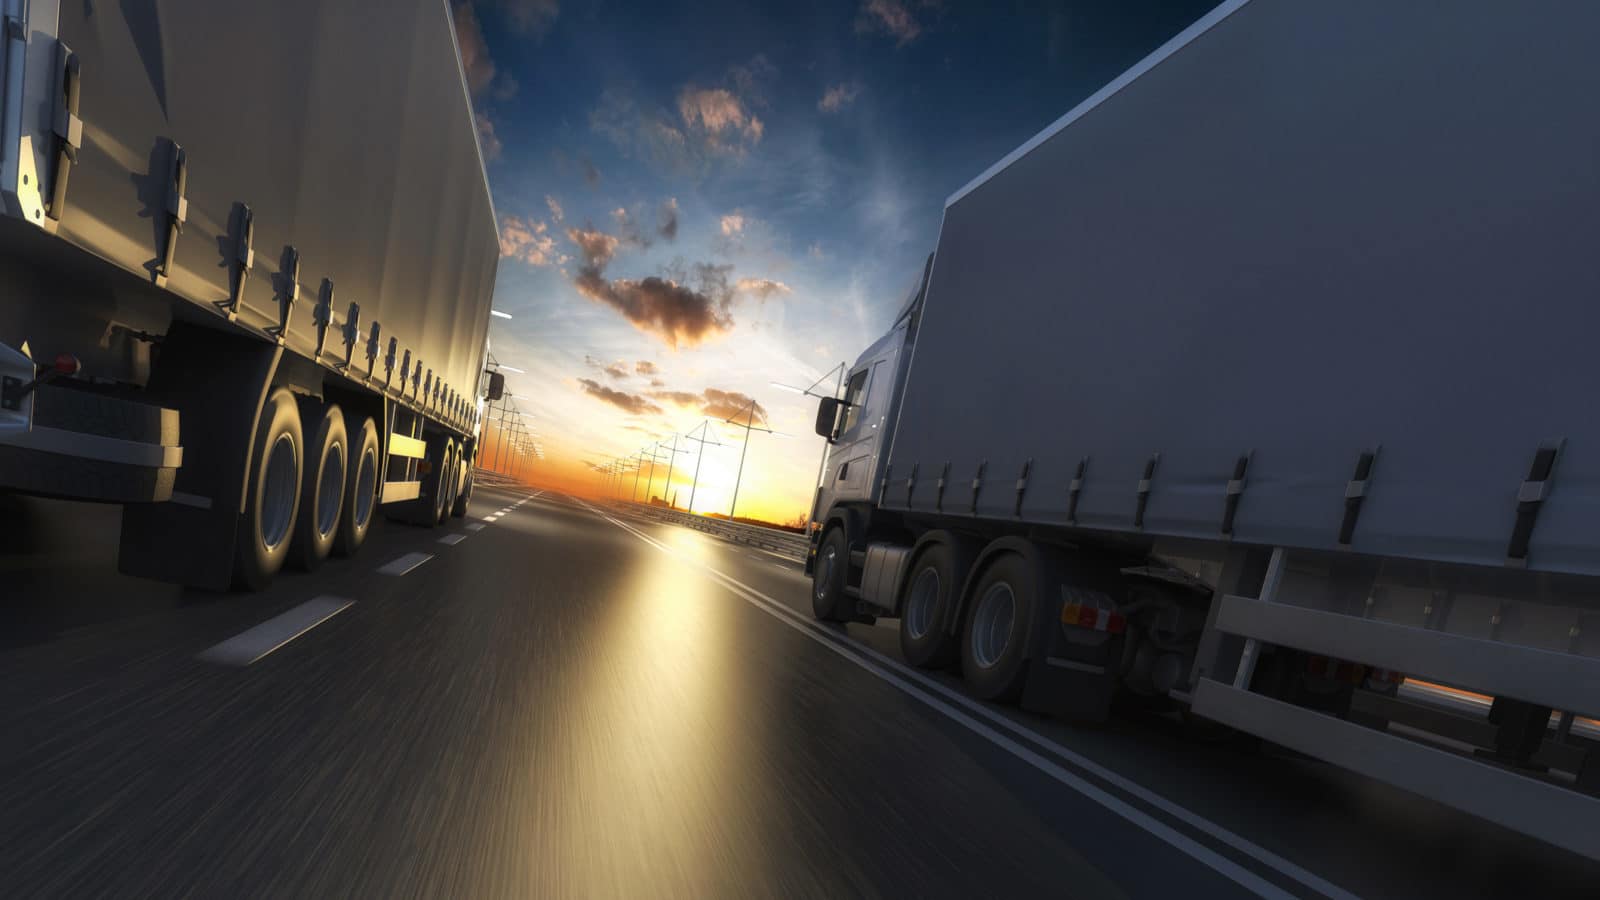 Trucking Injuries Attorney Houston: Seeking Justice After an Accident